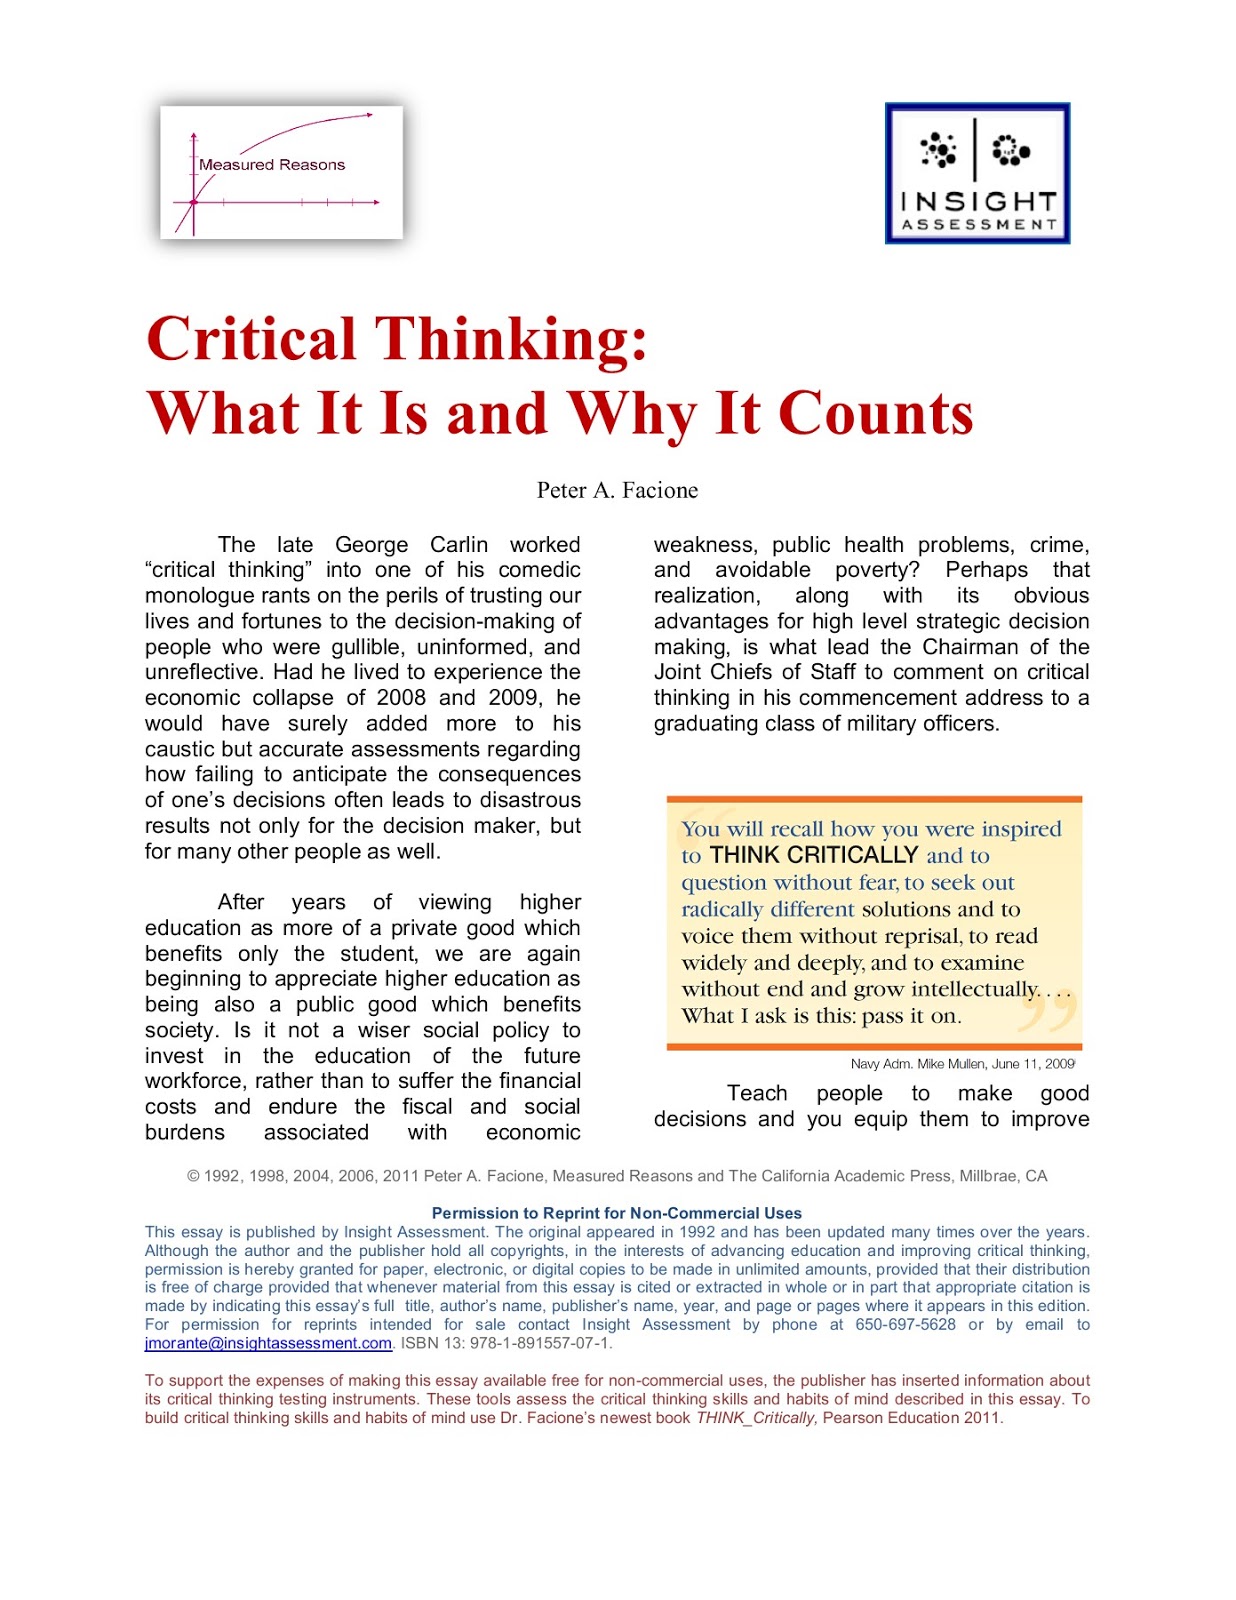 critical thinking in an essay